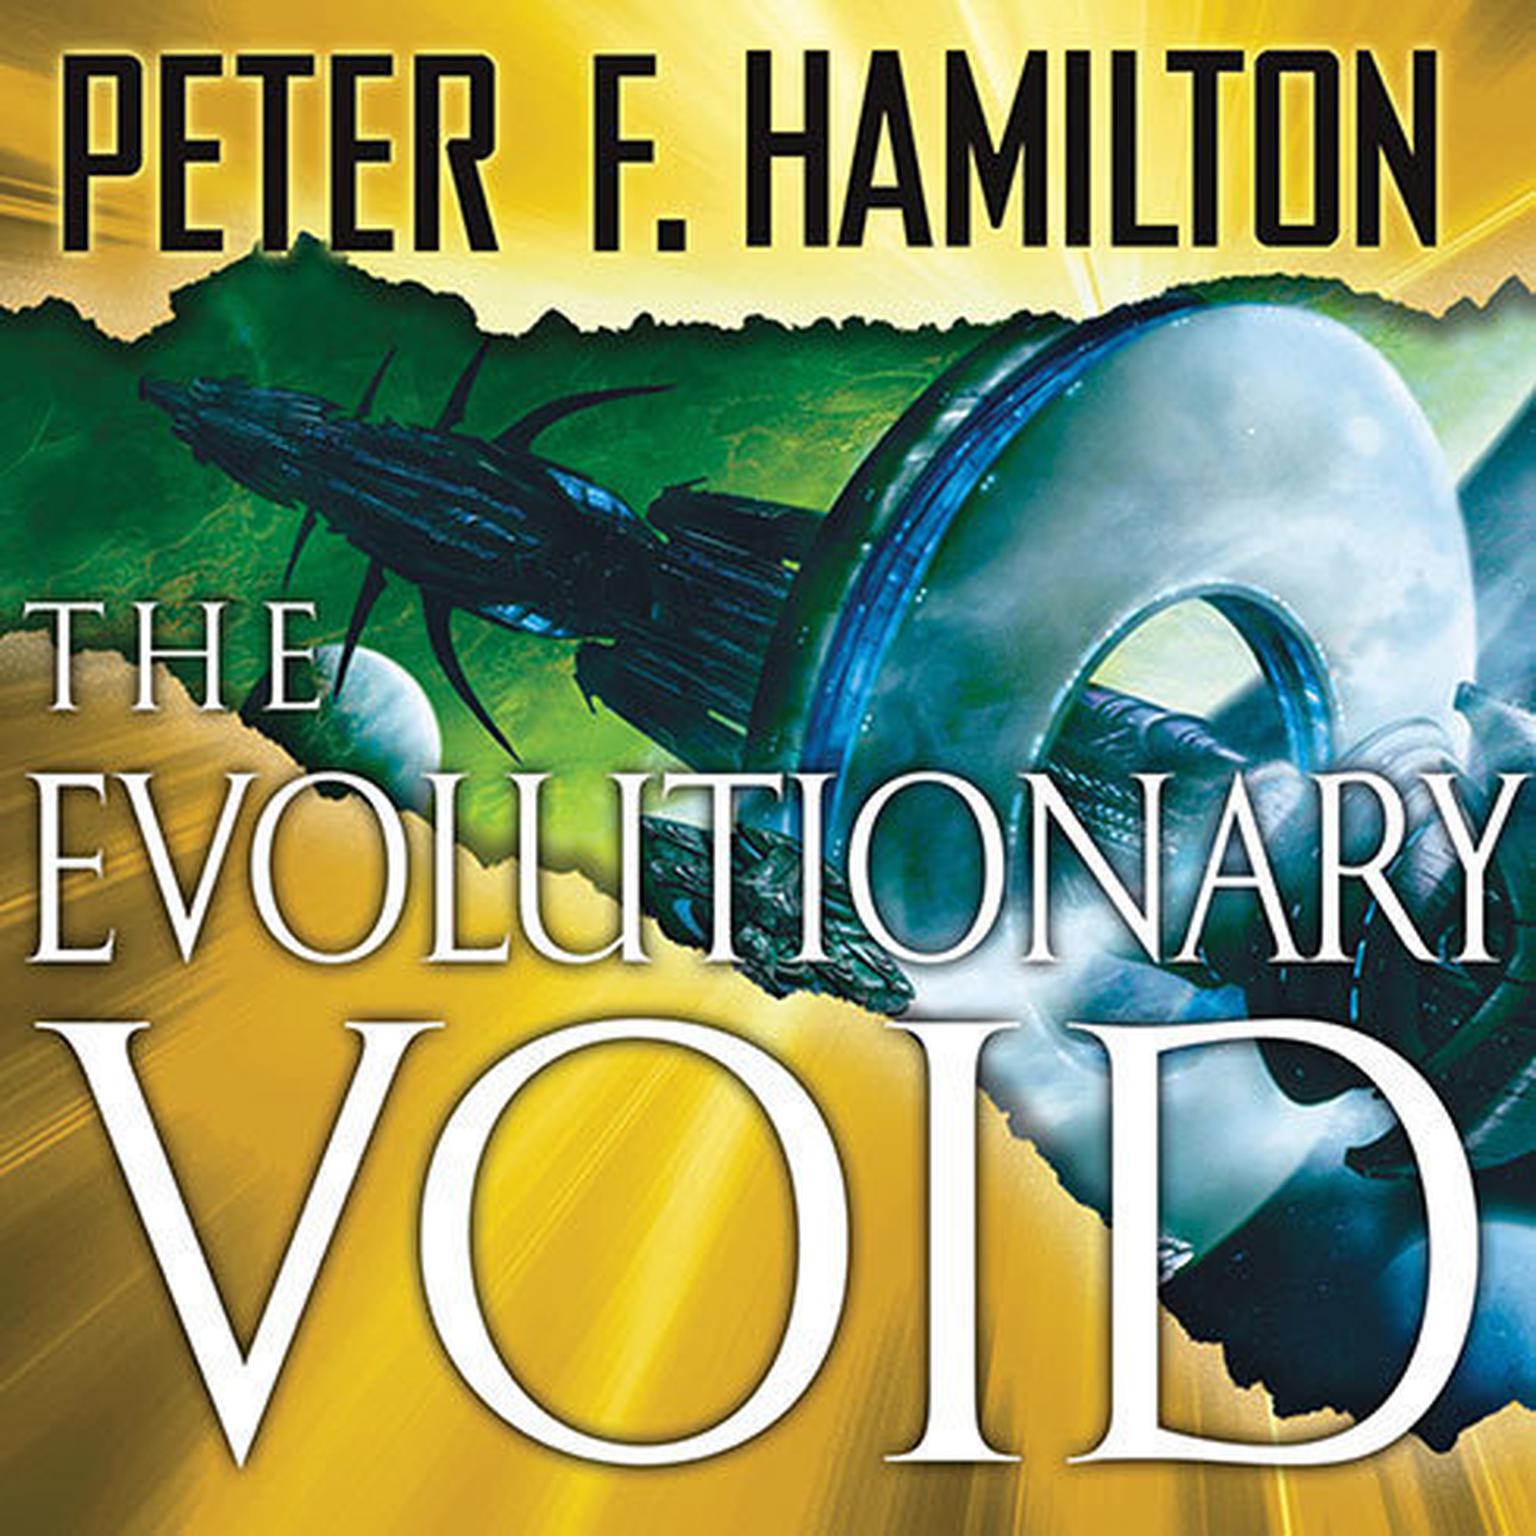 The Evolutionary Void Audiobook, by Peter F. Hamilton